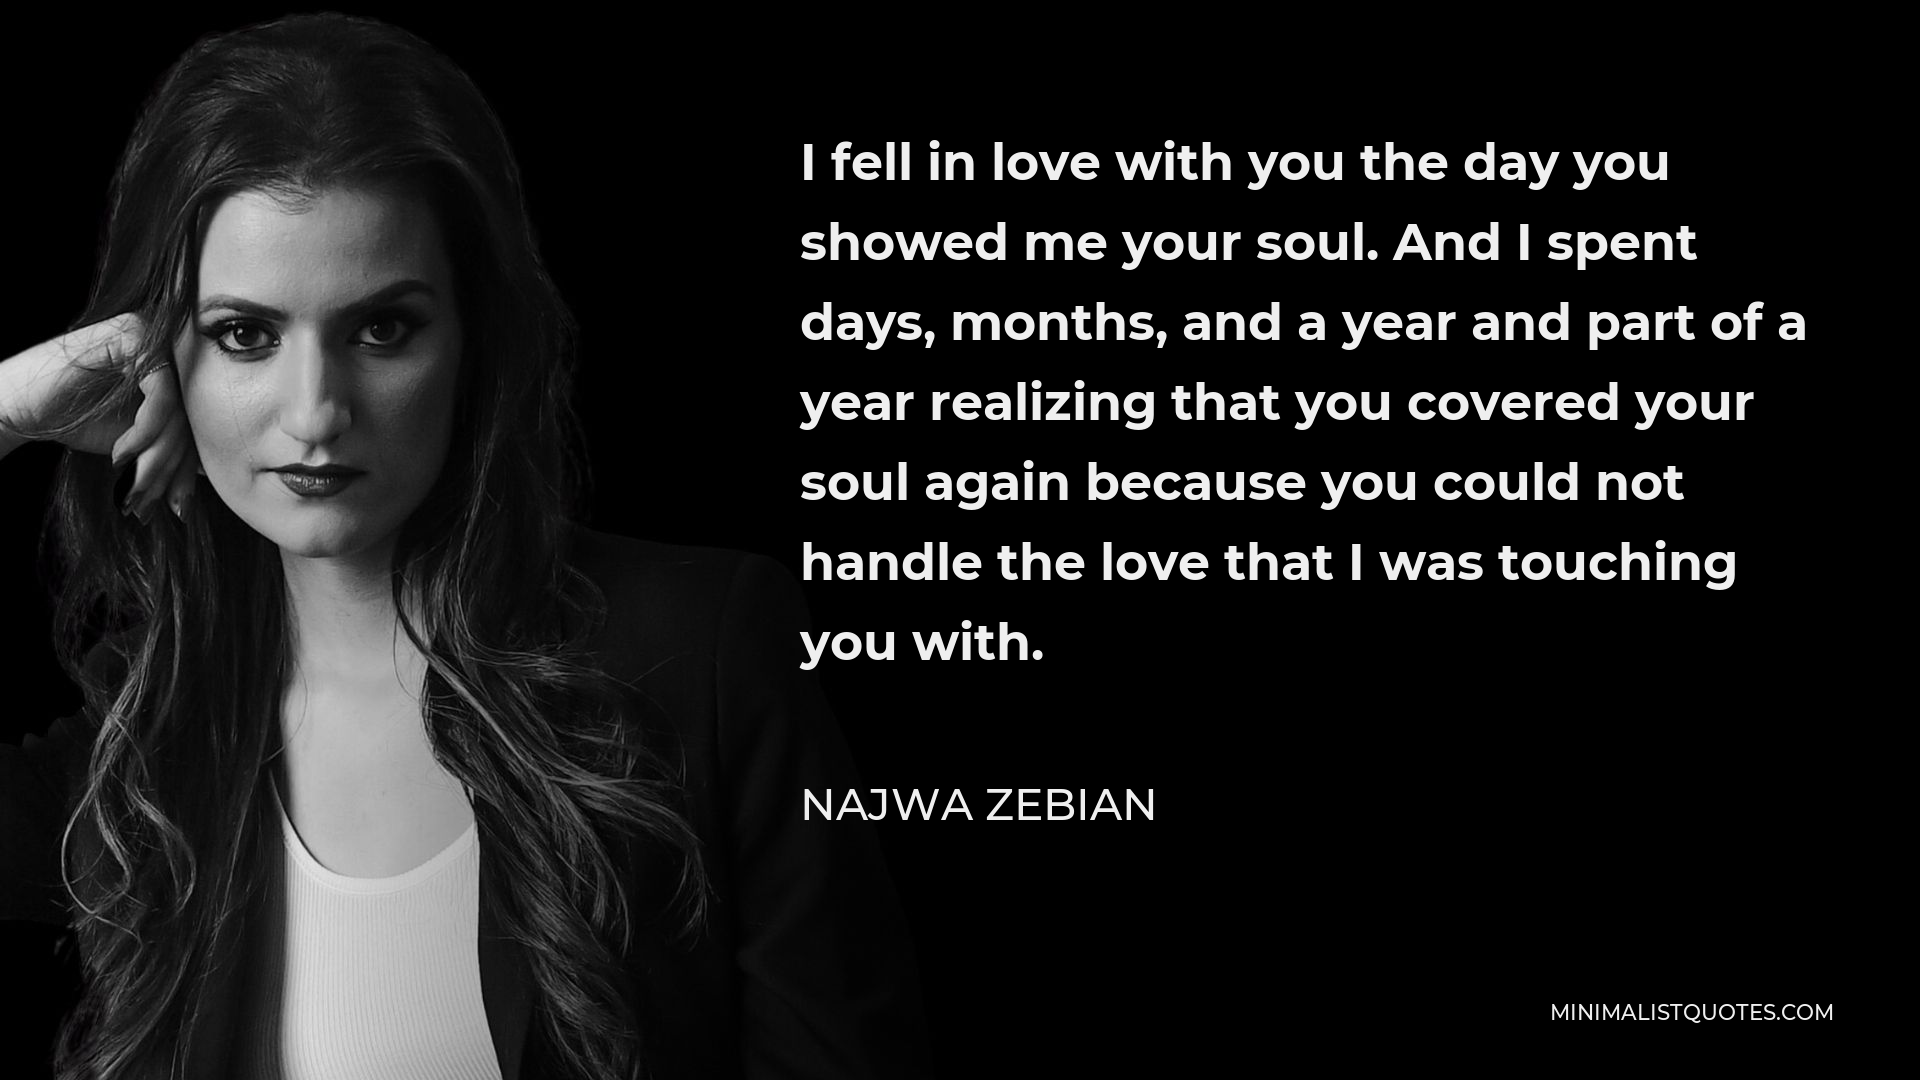 Najwa Zebian Quote - I fell in love with you the day you showed me your soul. And I spent days, months, and a year and part of a year realizing that you covered your soul again because you could not handle the love that I was touching you with.